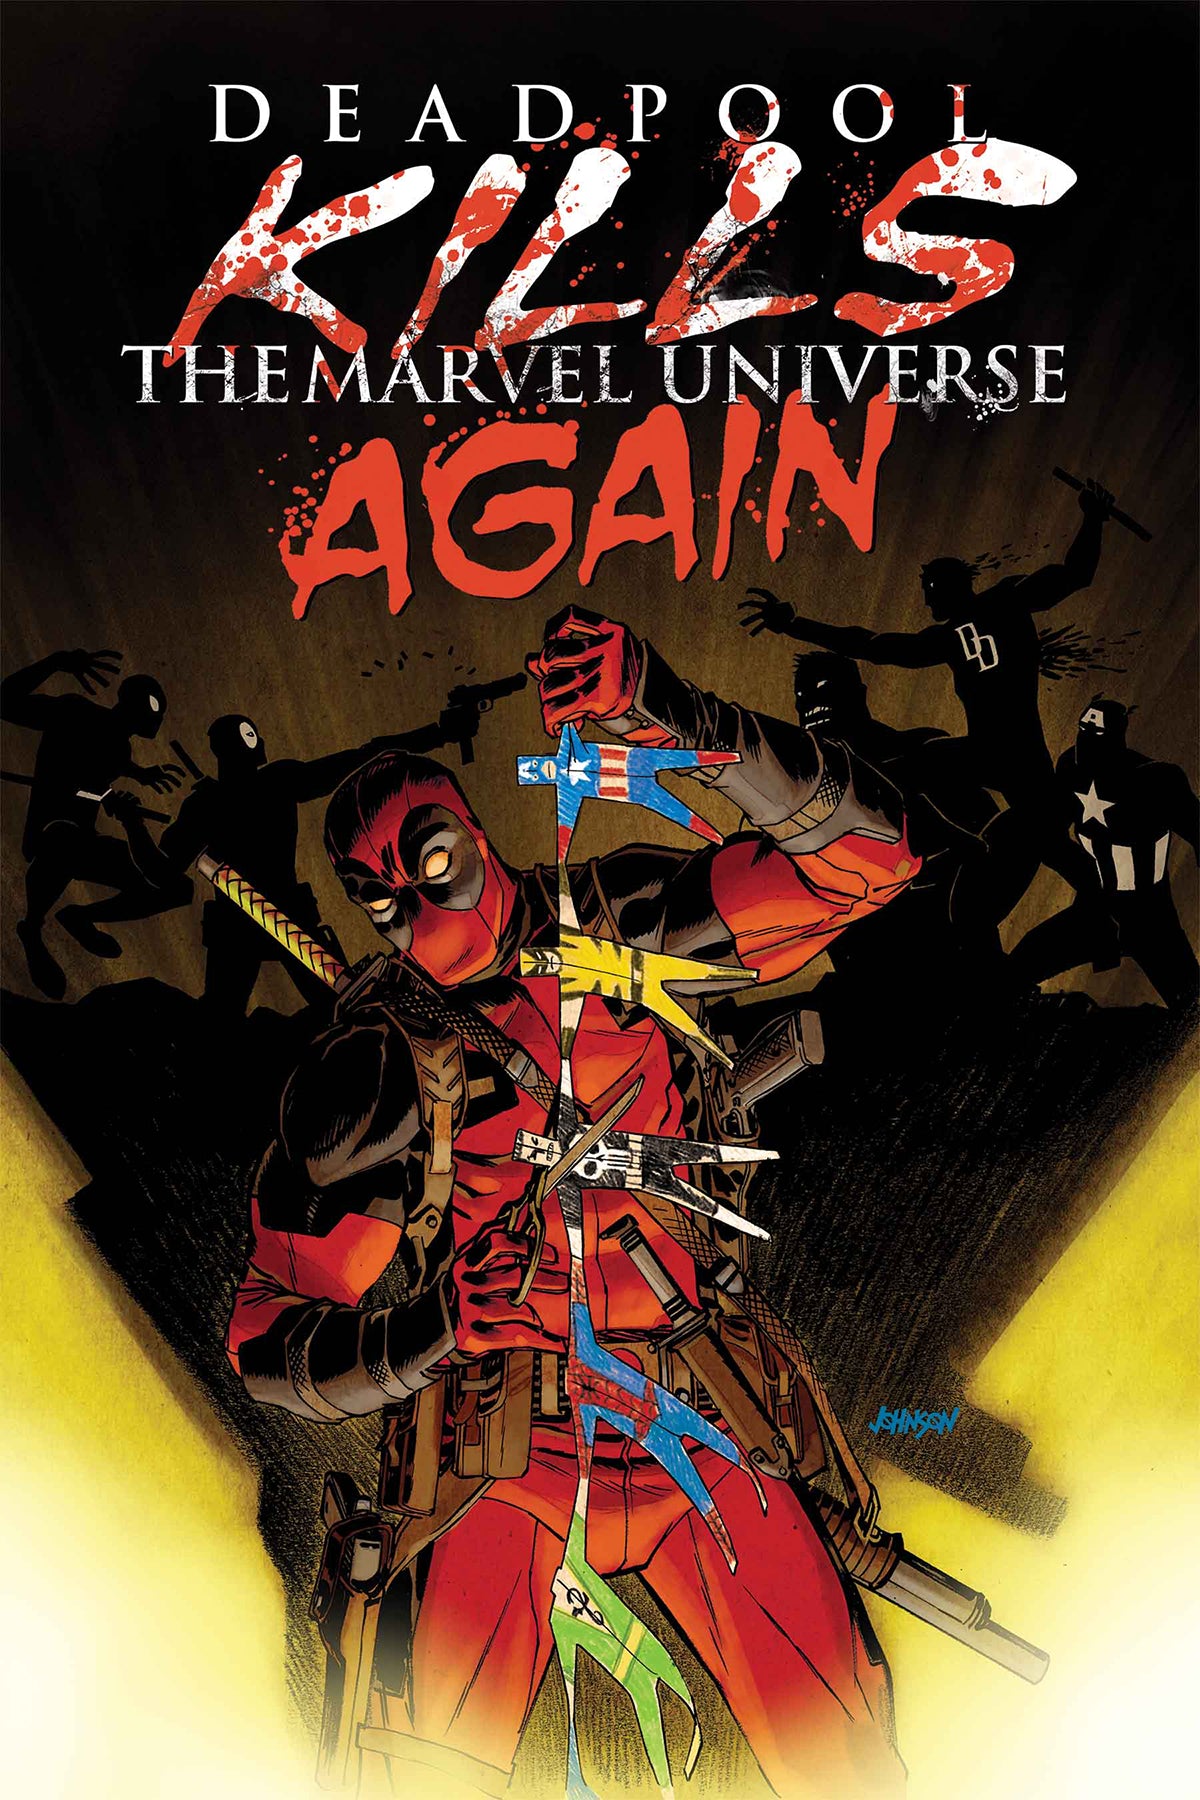 DEADPOOL KILLS MARVEL UNIVERSE AGAIN #1 to #5 (OF 5) | Game Master's Emporium (The New GME)